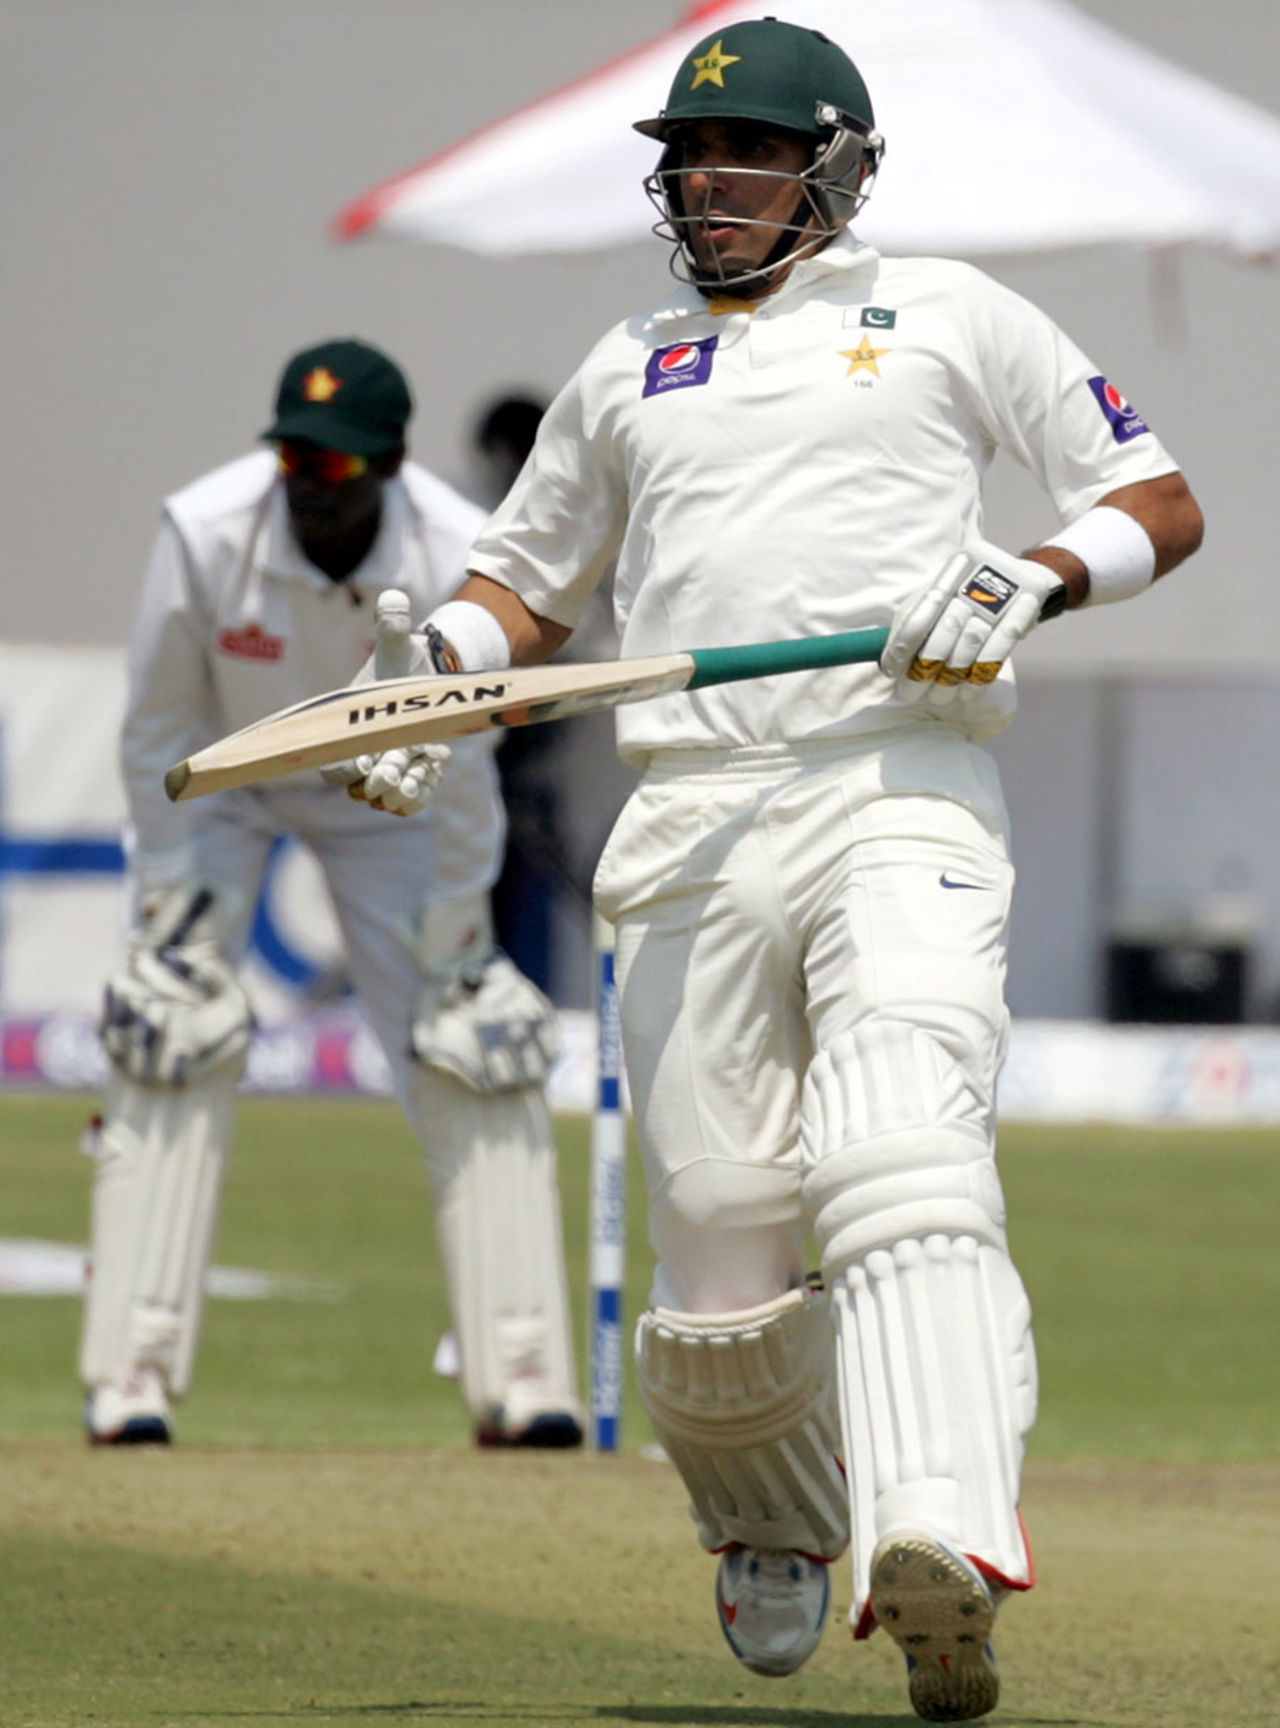 Misbah-ul-Haq completes a run, Zimbabwe v Pakistan, 1st Test, Harare, 1st day, September 3, 2013